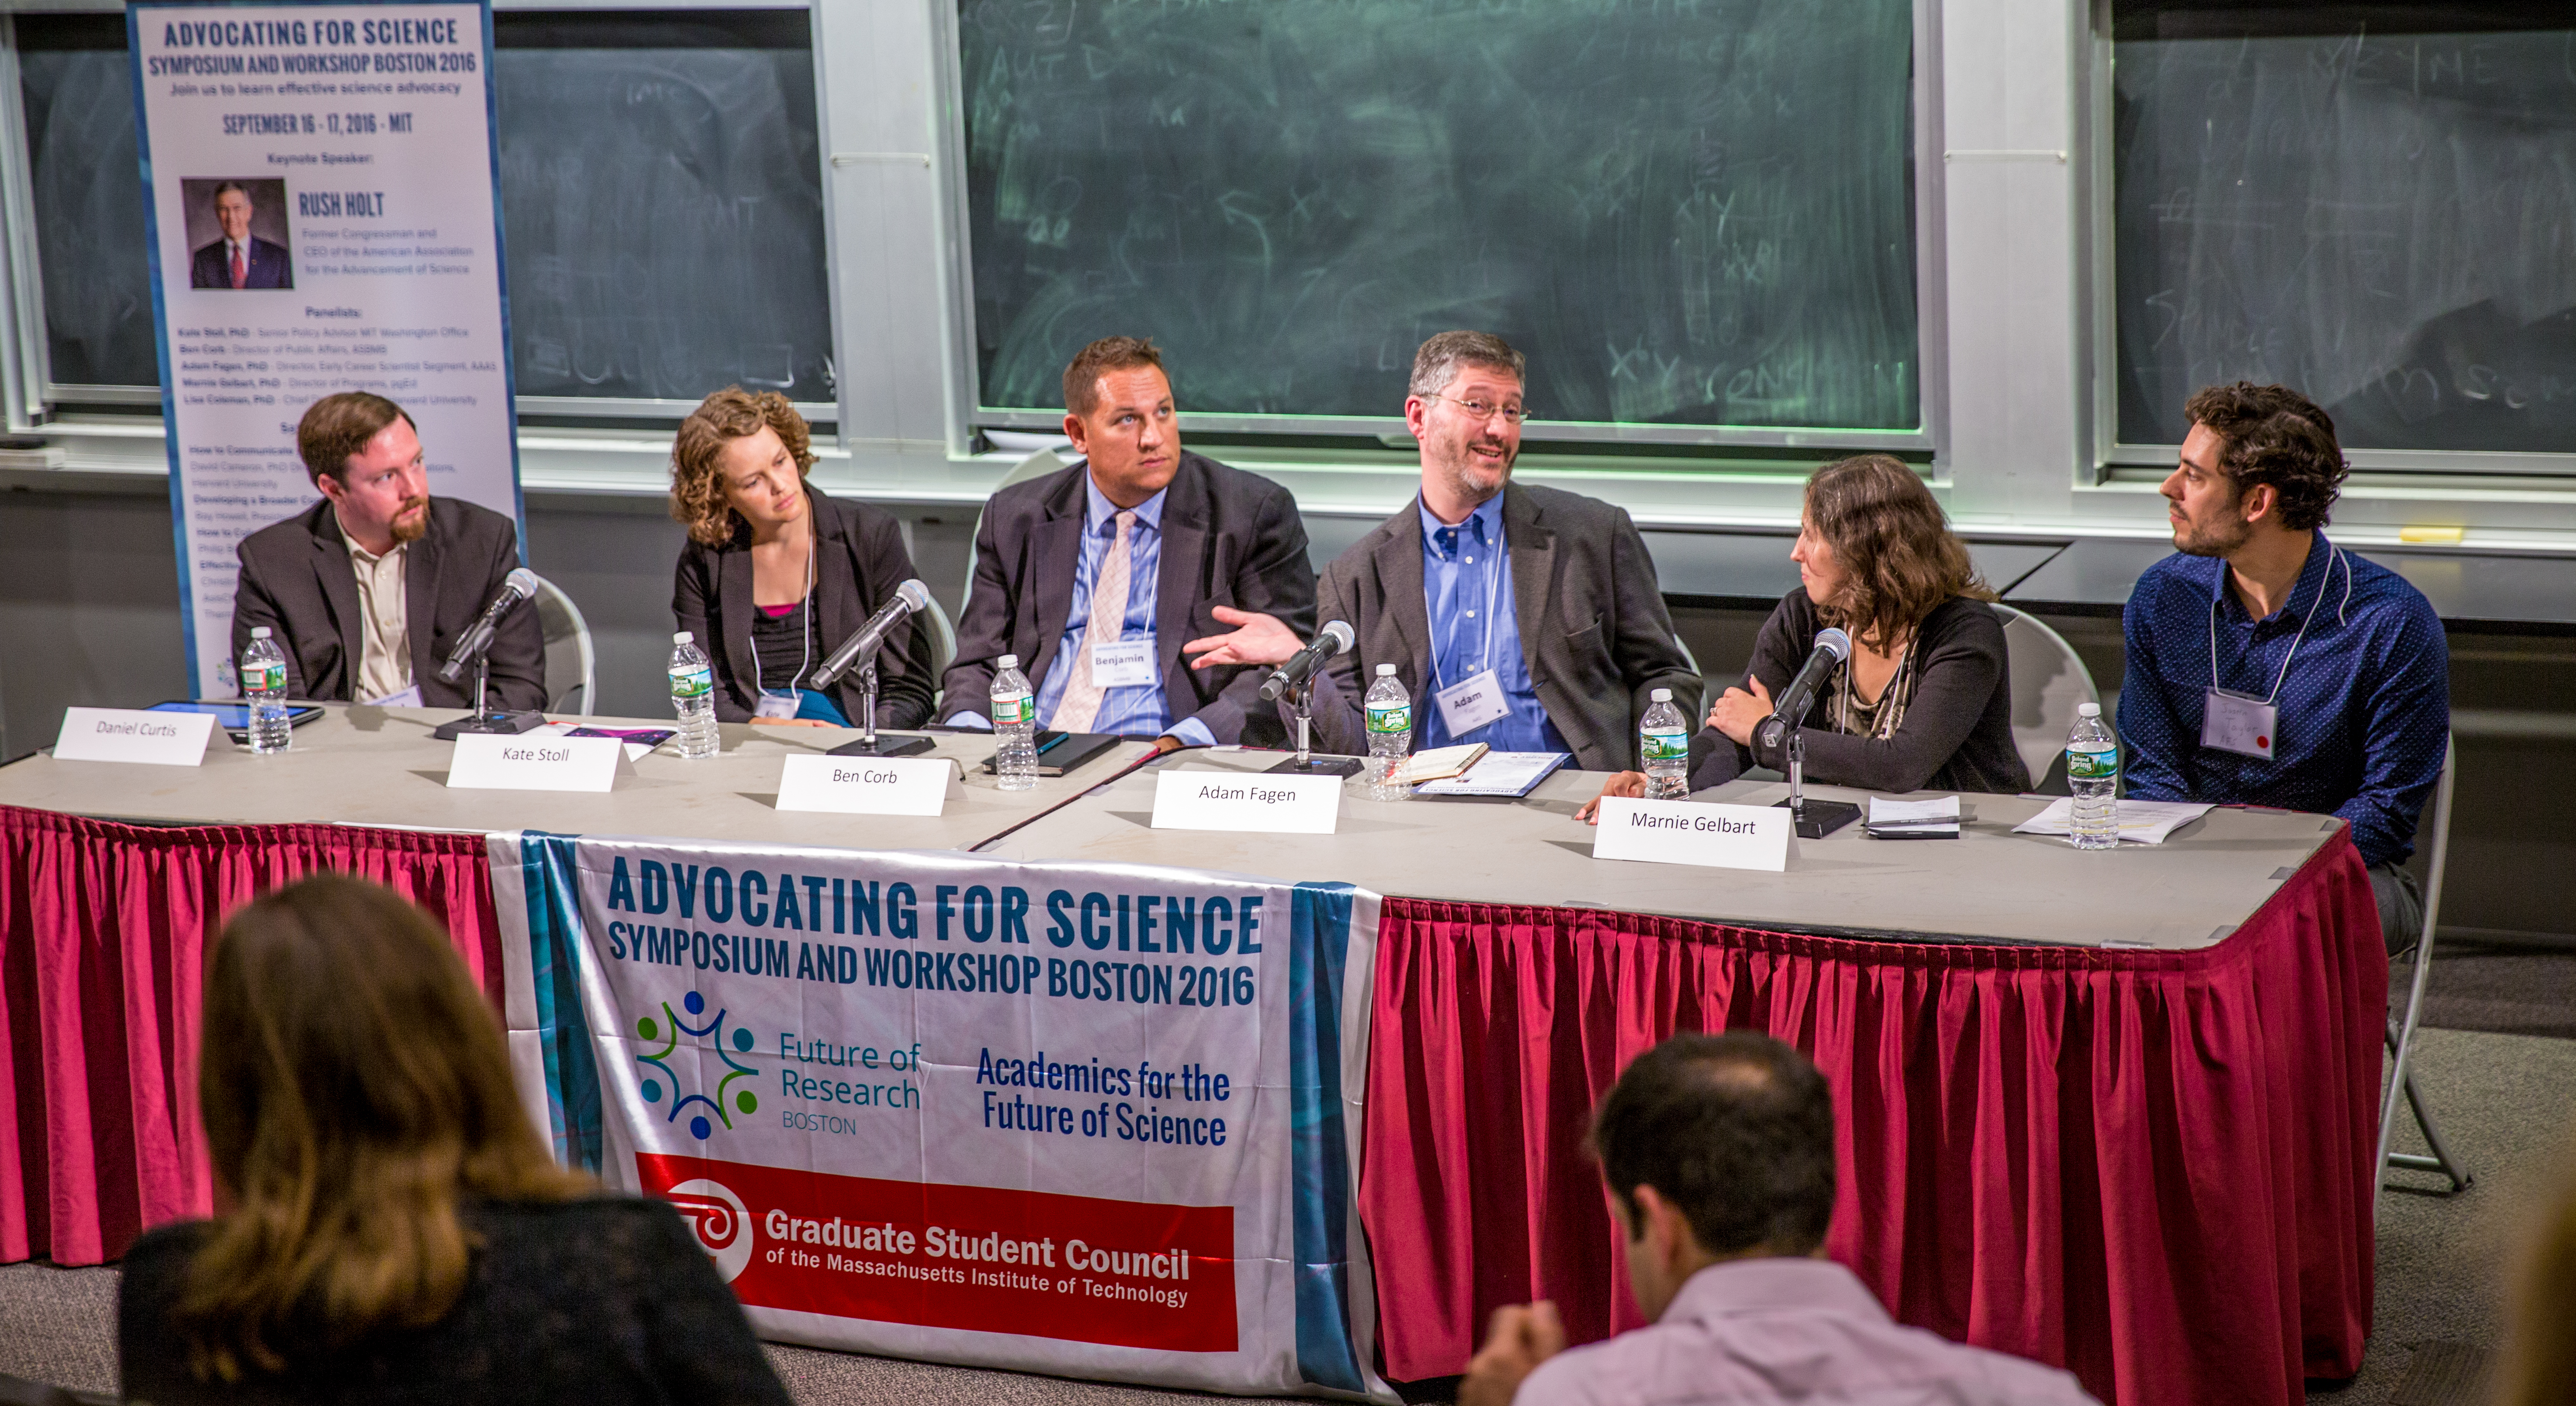 Science advocacy panel. From left: moderator Daniel Curtis, MIT Office Senior Policy Advisor: Dr. Kate Stoll, ASBMB Director of Public Affairs: Ben Corb, Director of the Early Career Scientist Segment at AAAS: Dr. Adam Fagen, Director of Programs for pgEd: Dr. Marnie Gilbert, and moderator Justin Taylor. Photo by Alina Chan.